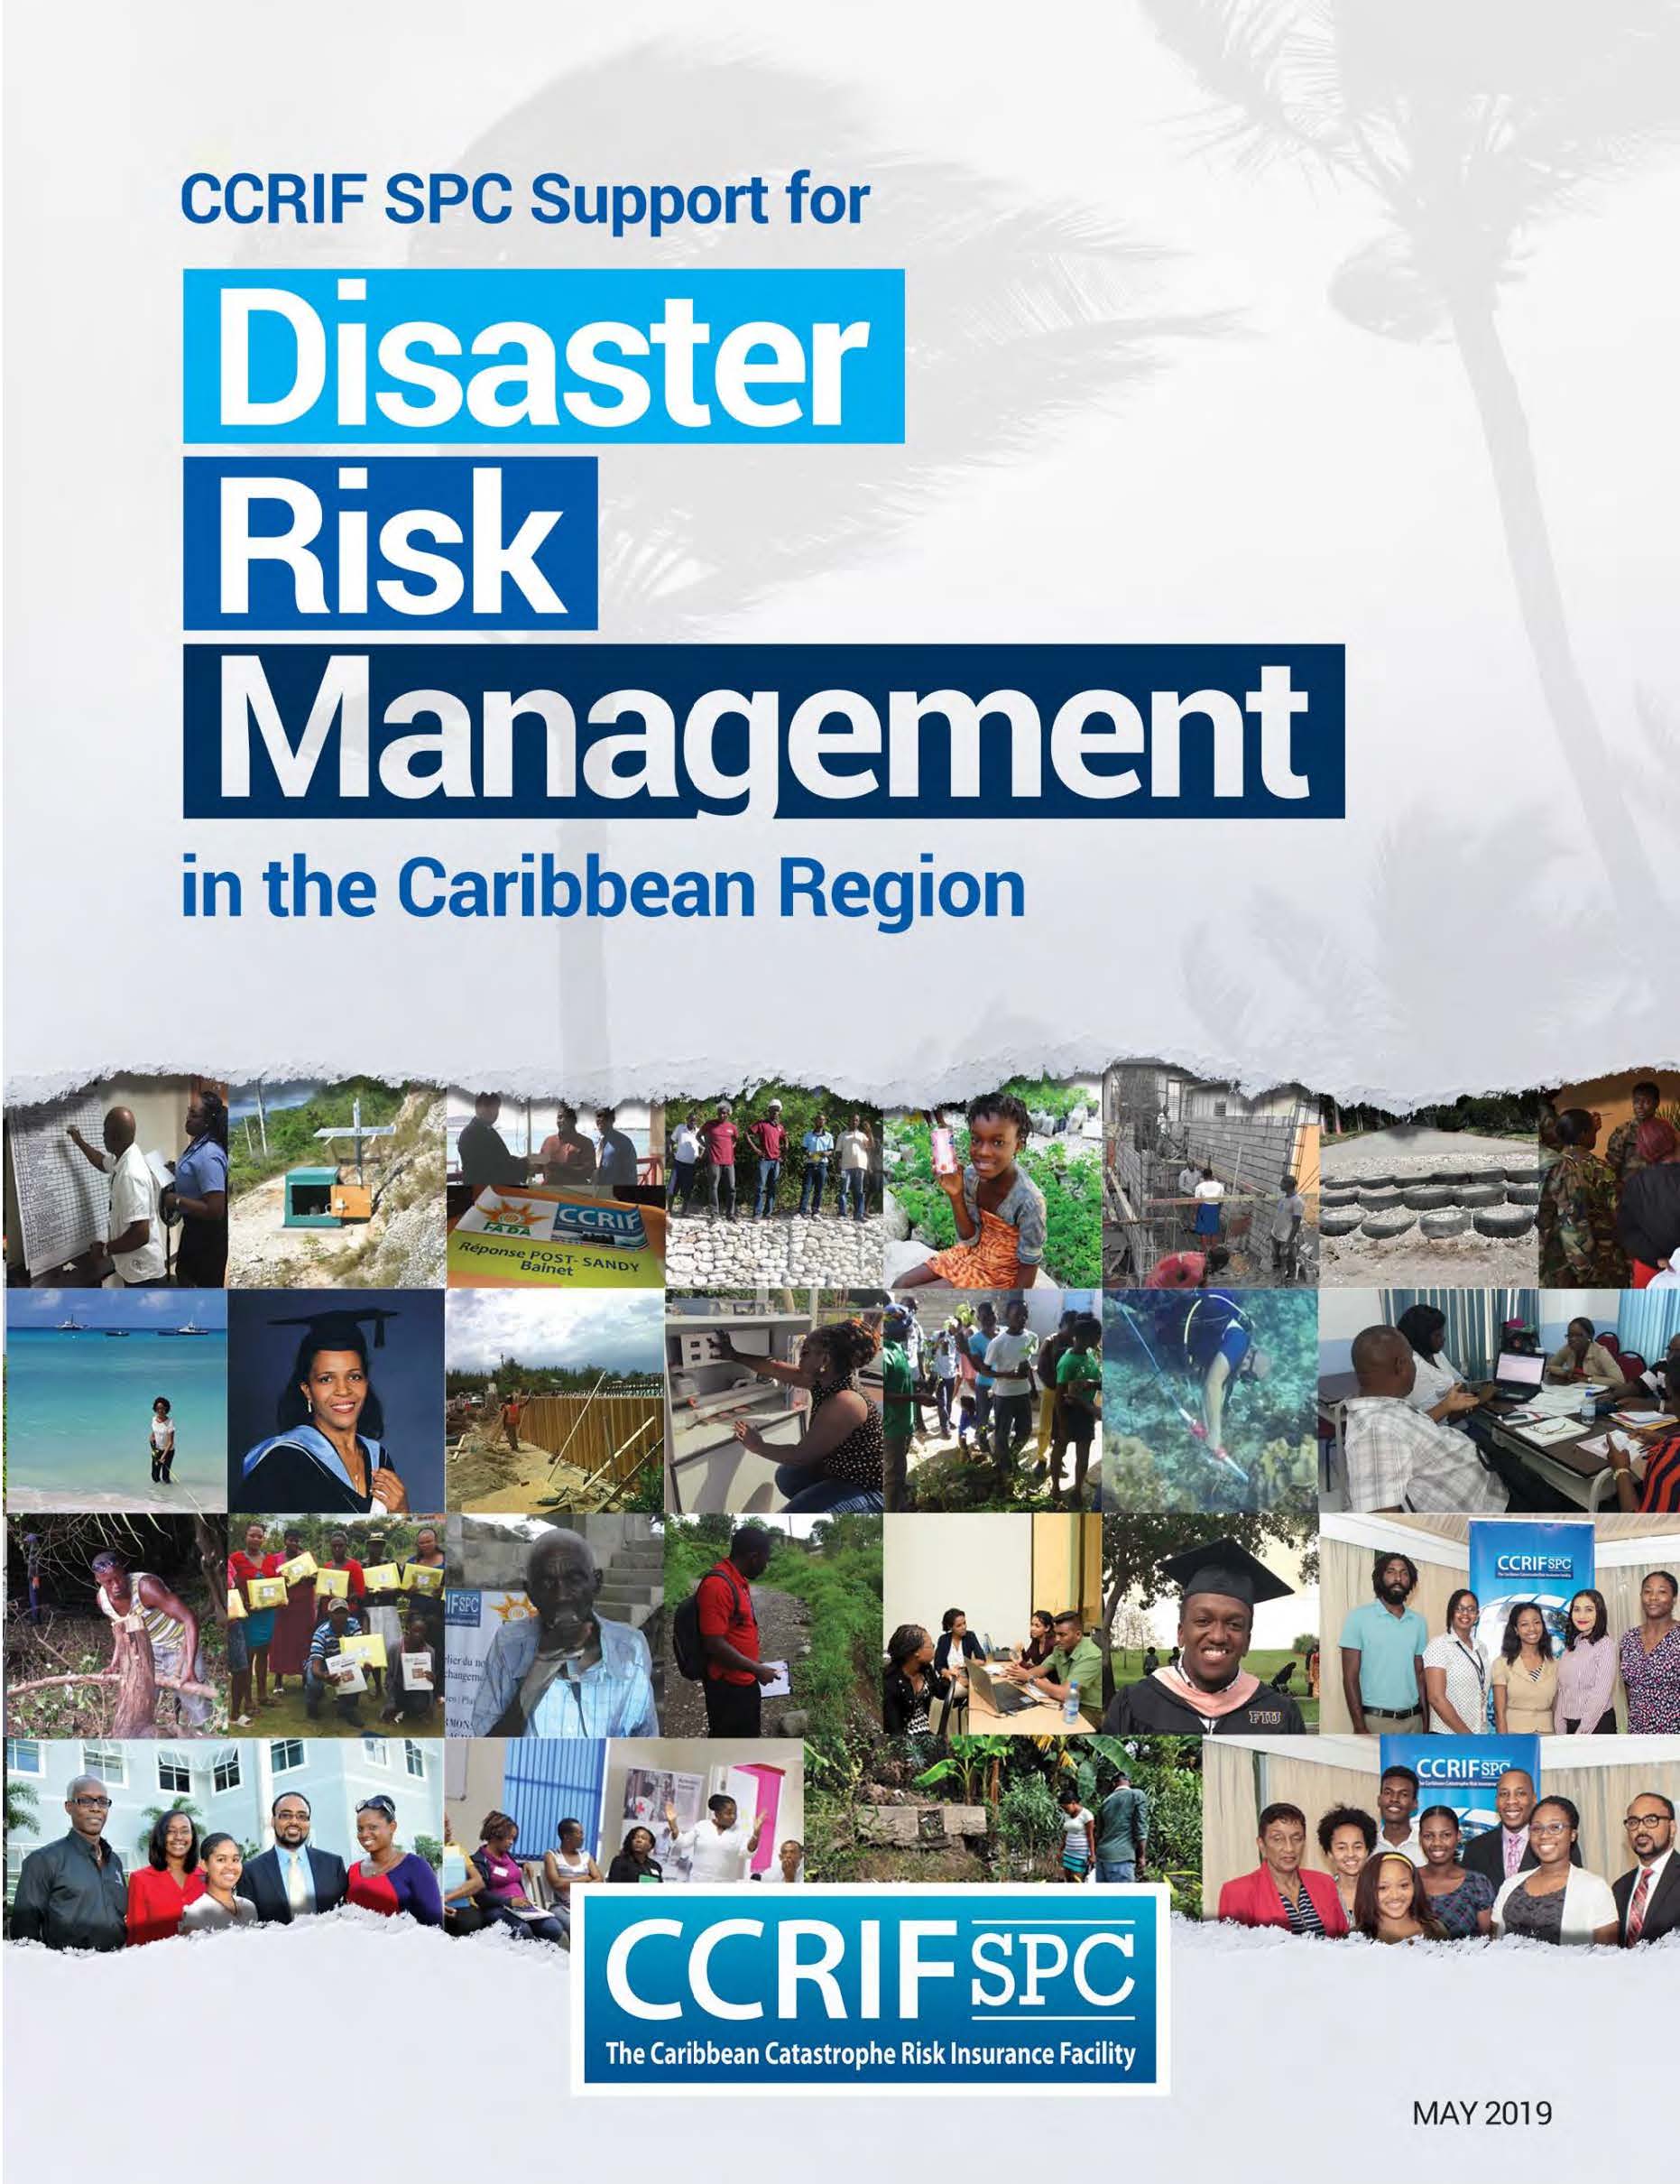 CCRIF SPC Support for Disaster Risk Management in the Caribbean Region